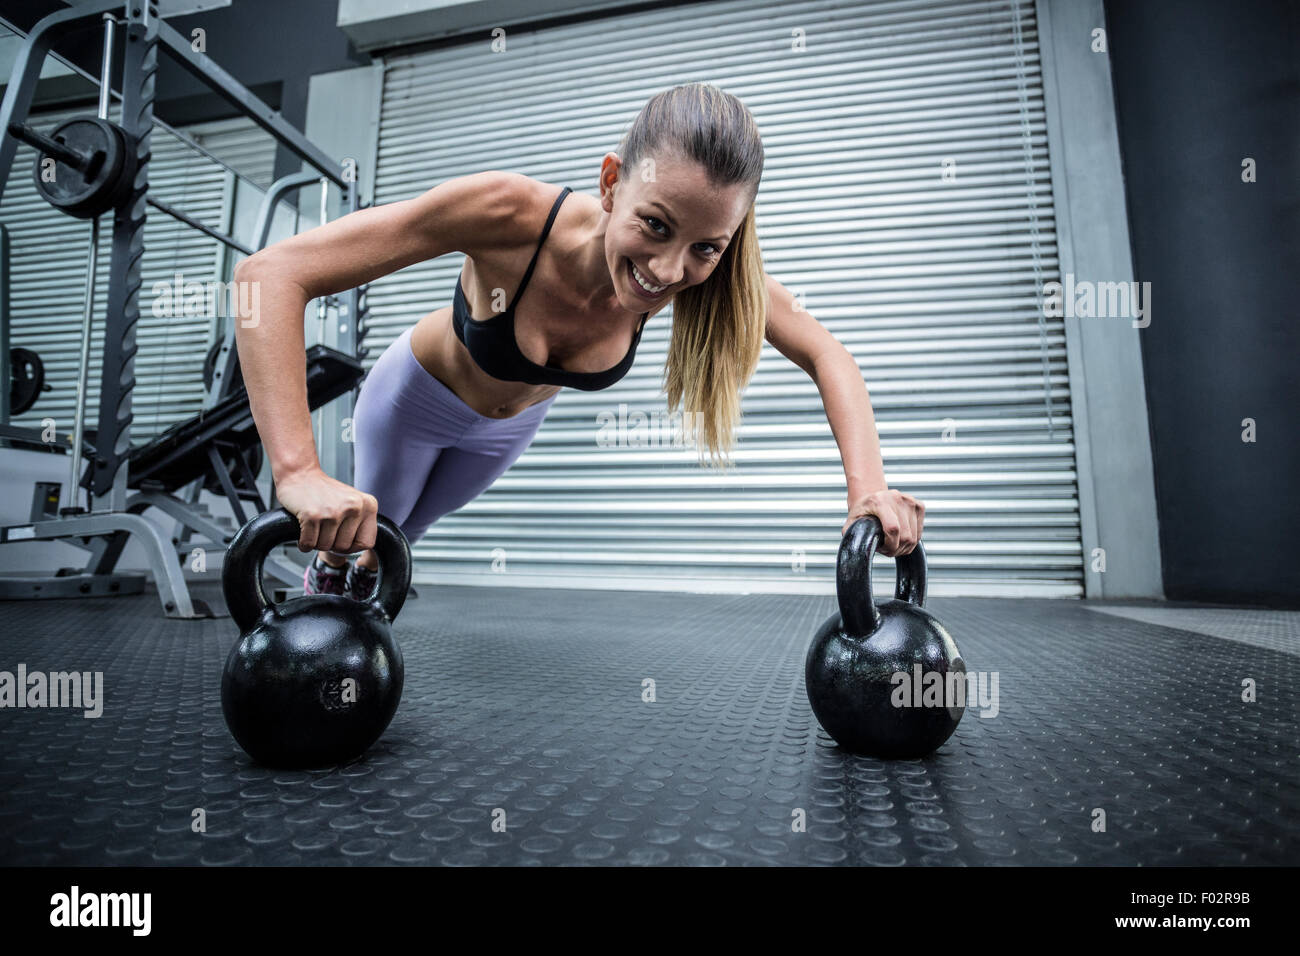 Muscular woman doing pushups with kettlebells Stock Photo